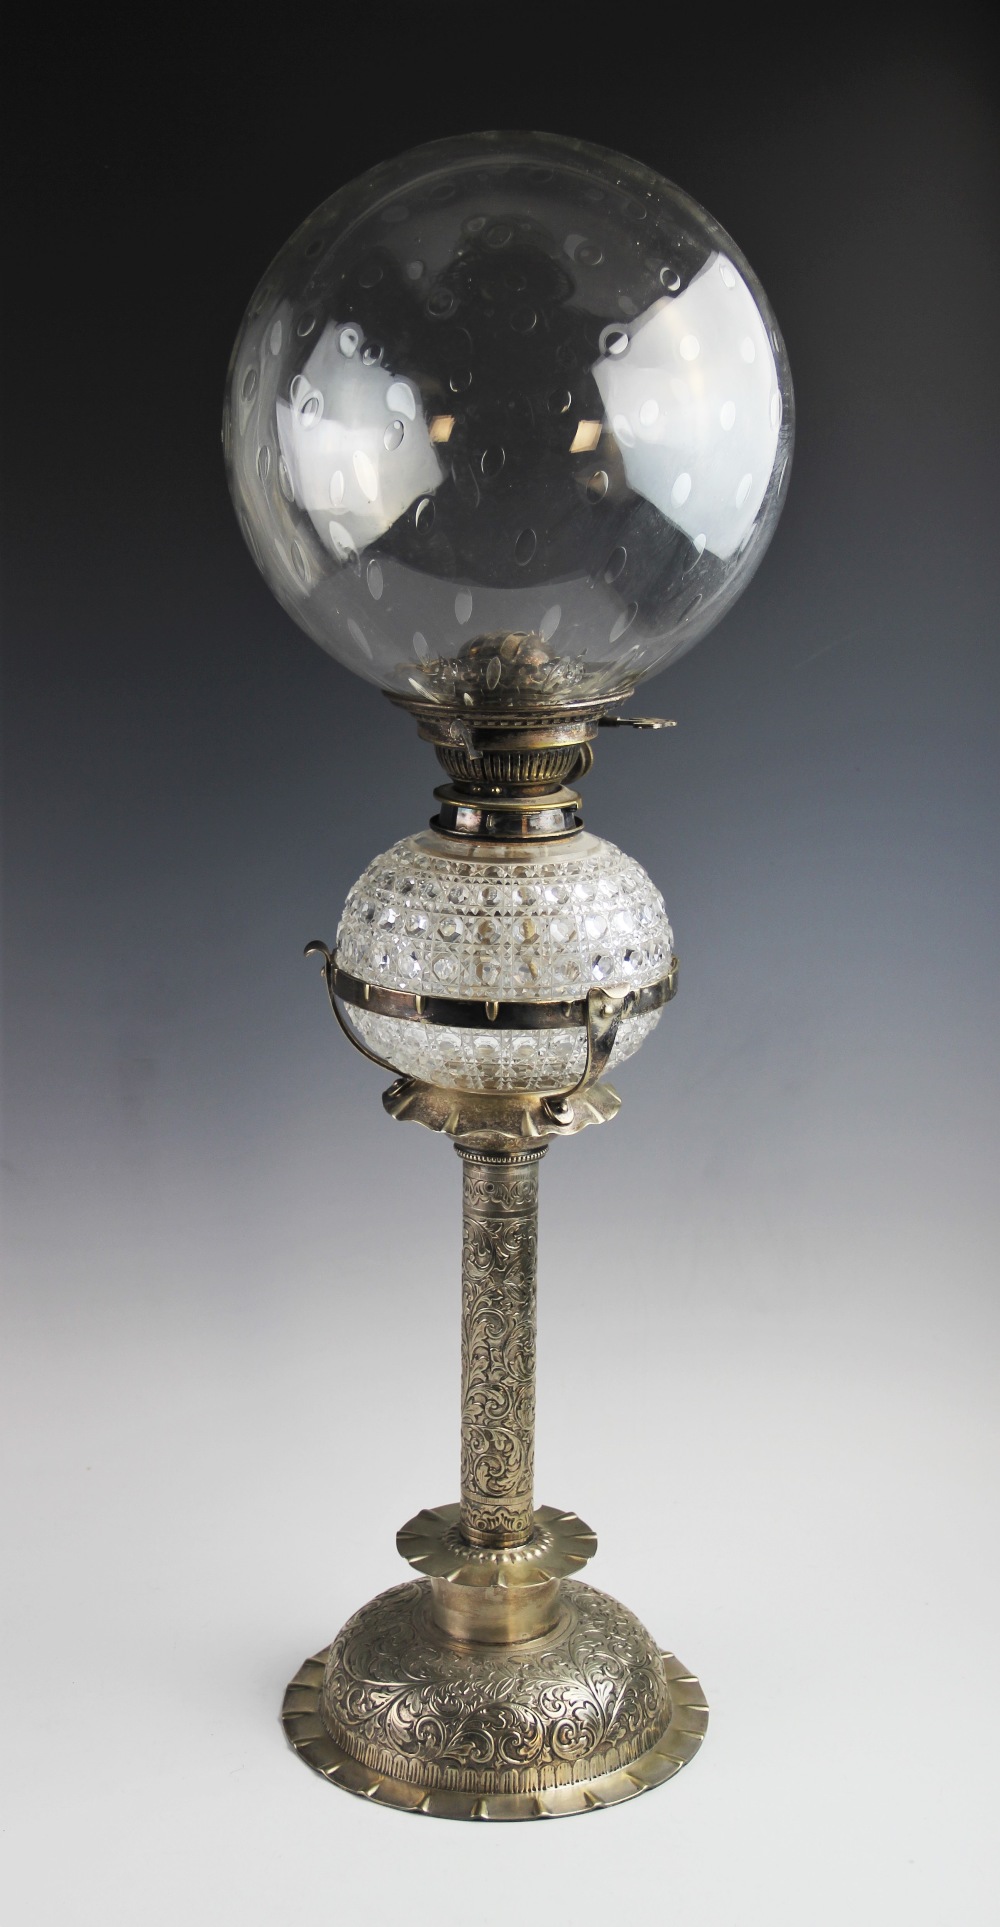 A late 19th century white metal oil lamp by Hinks & Sons, the bubble blown spherical glass shade